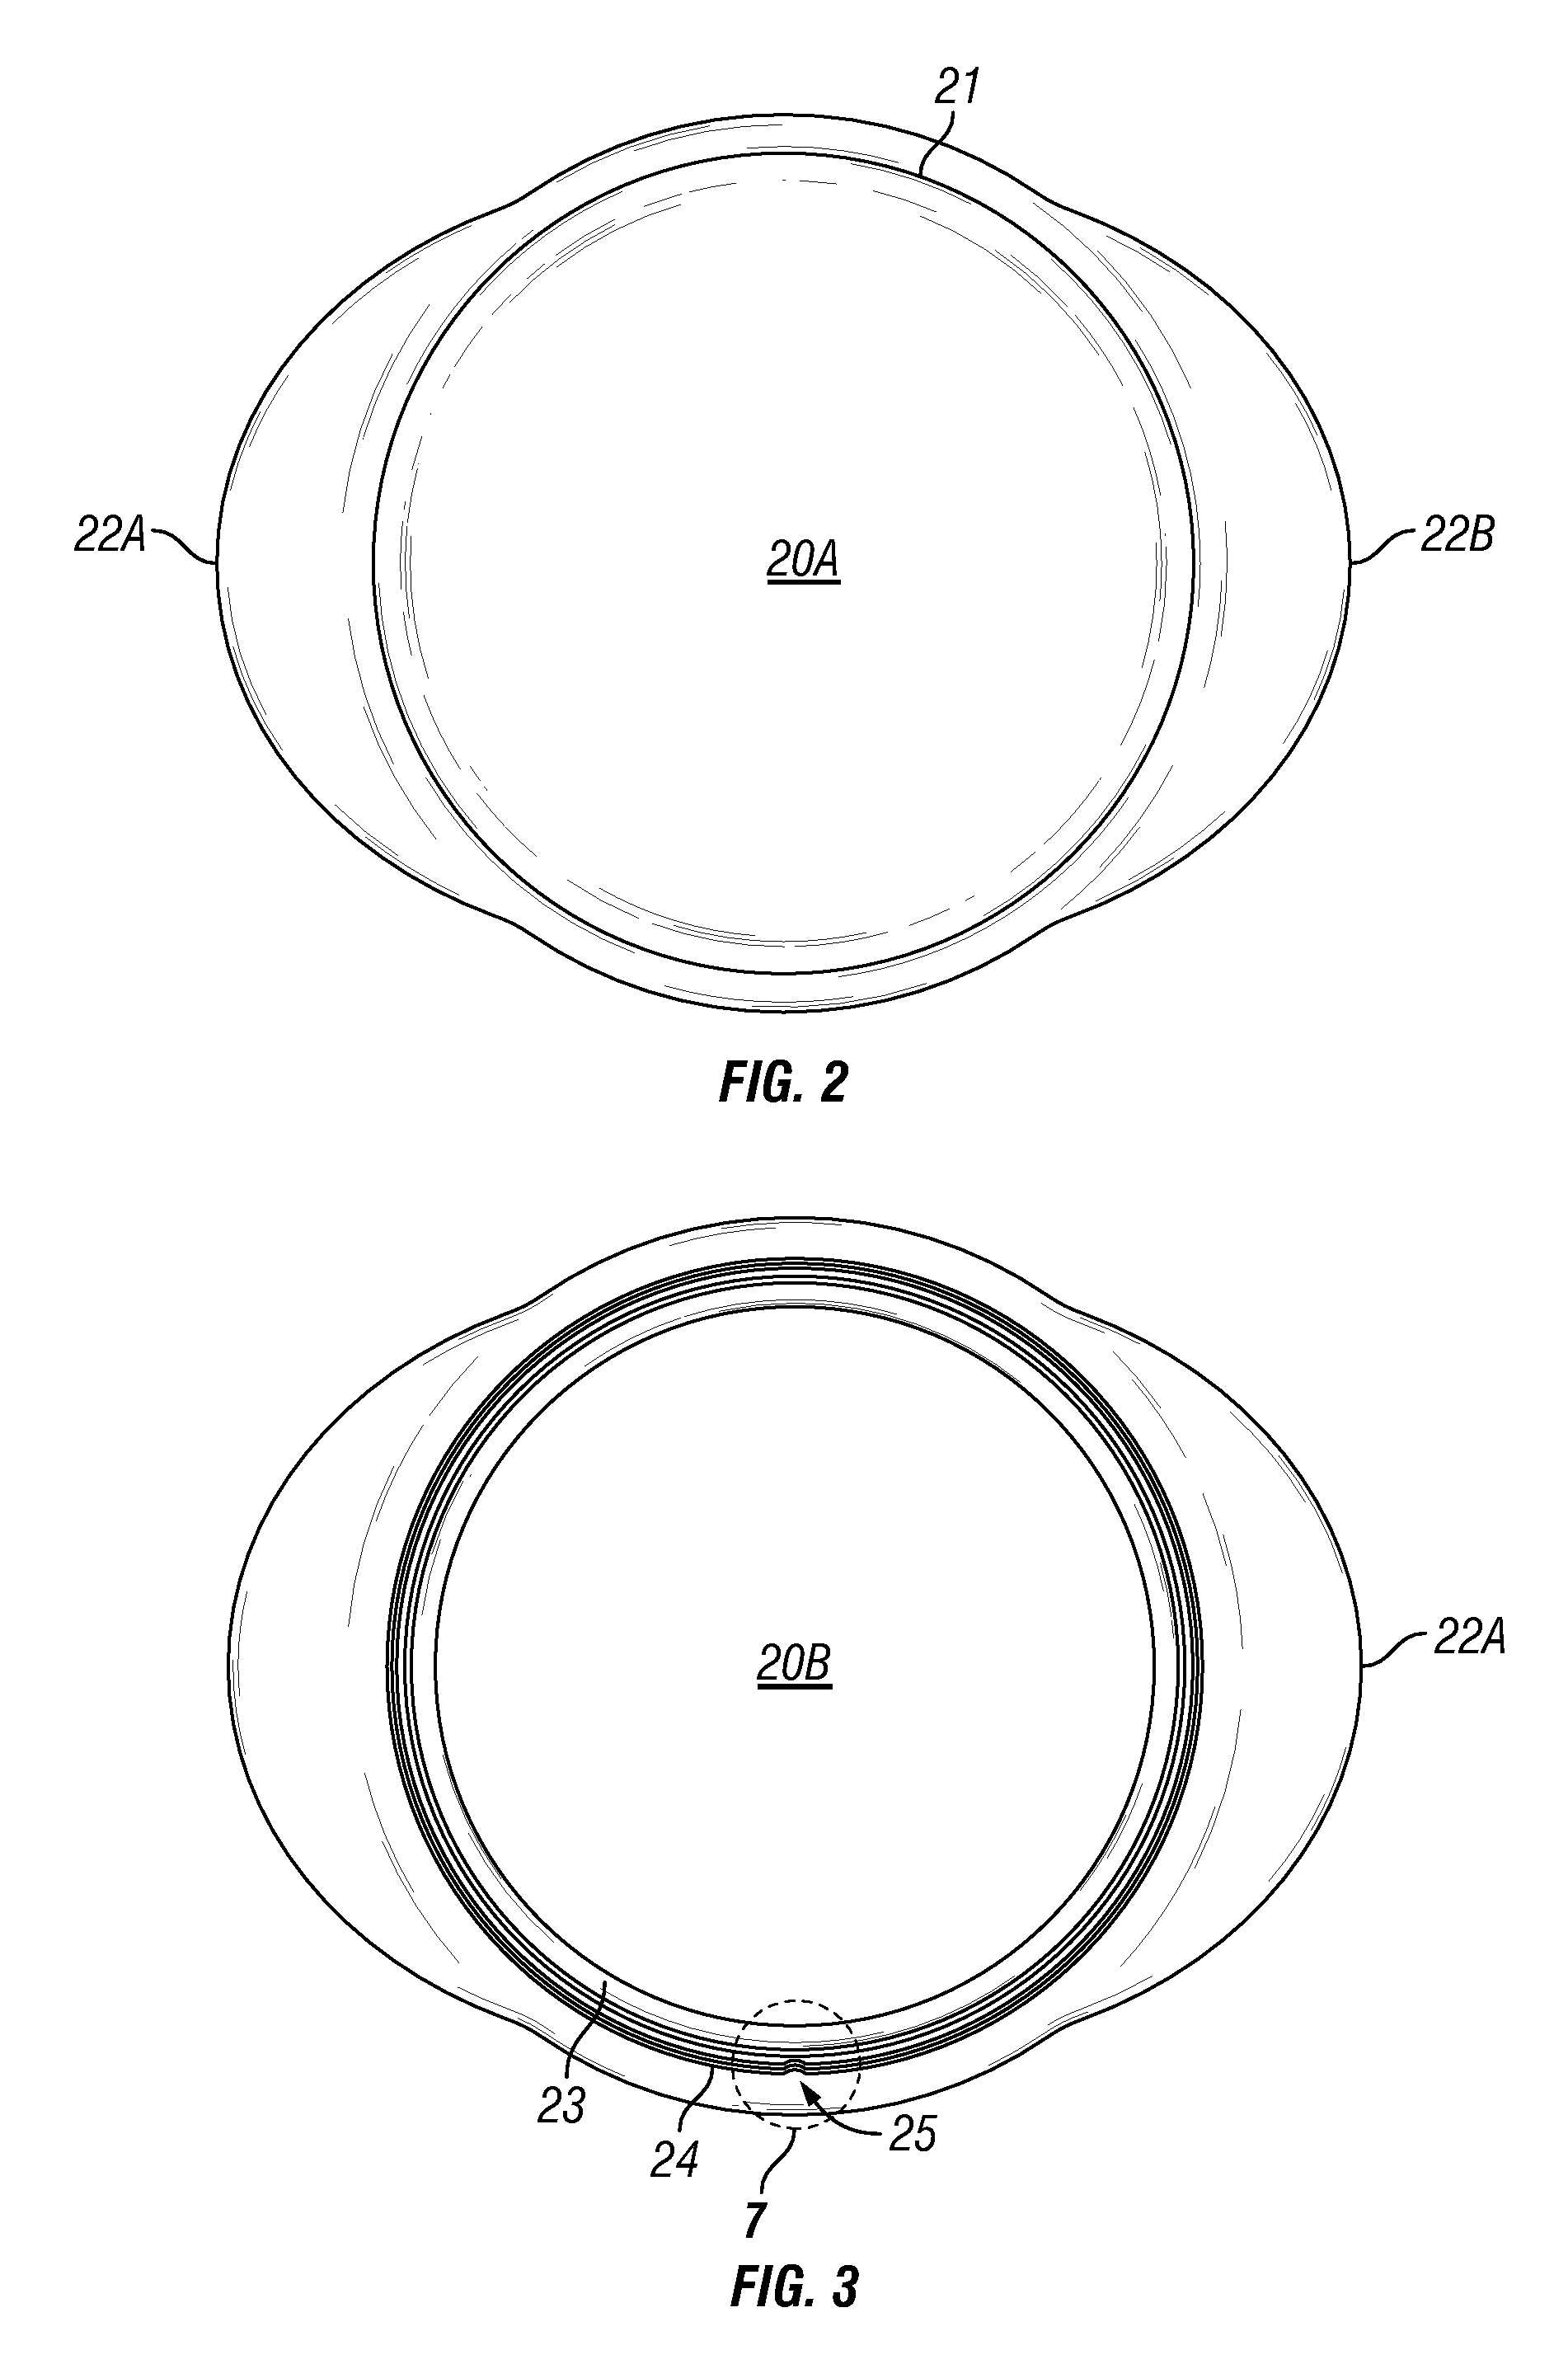 Food container apparatus and method of using same